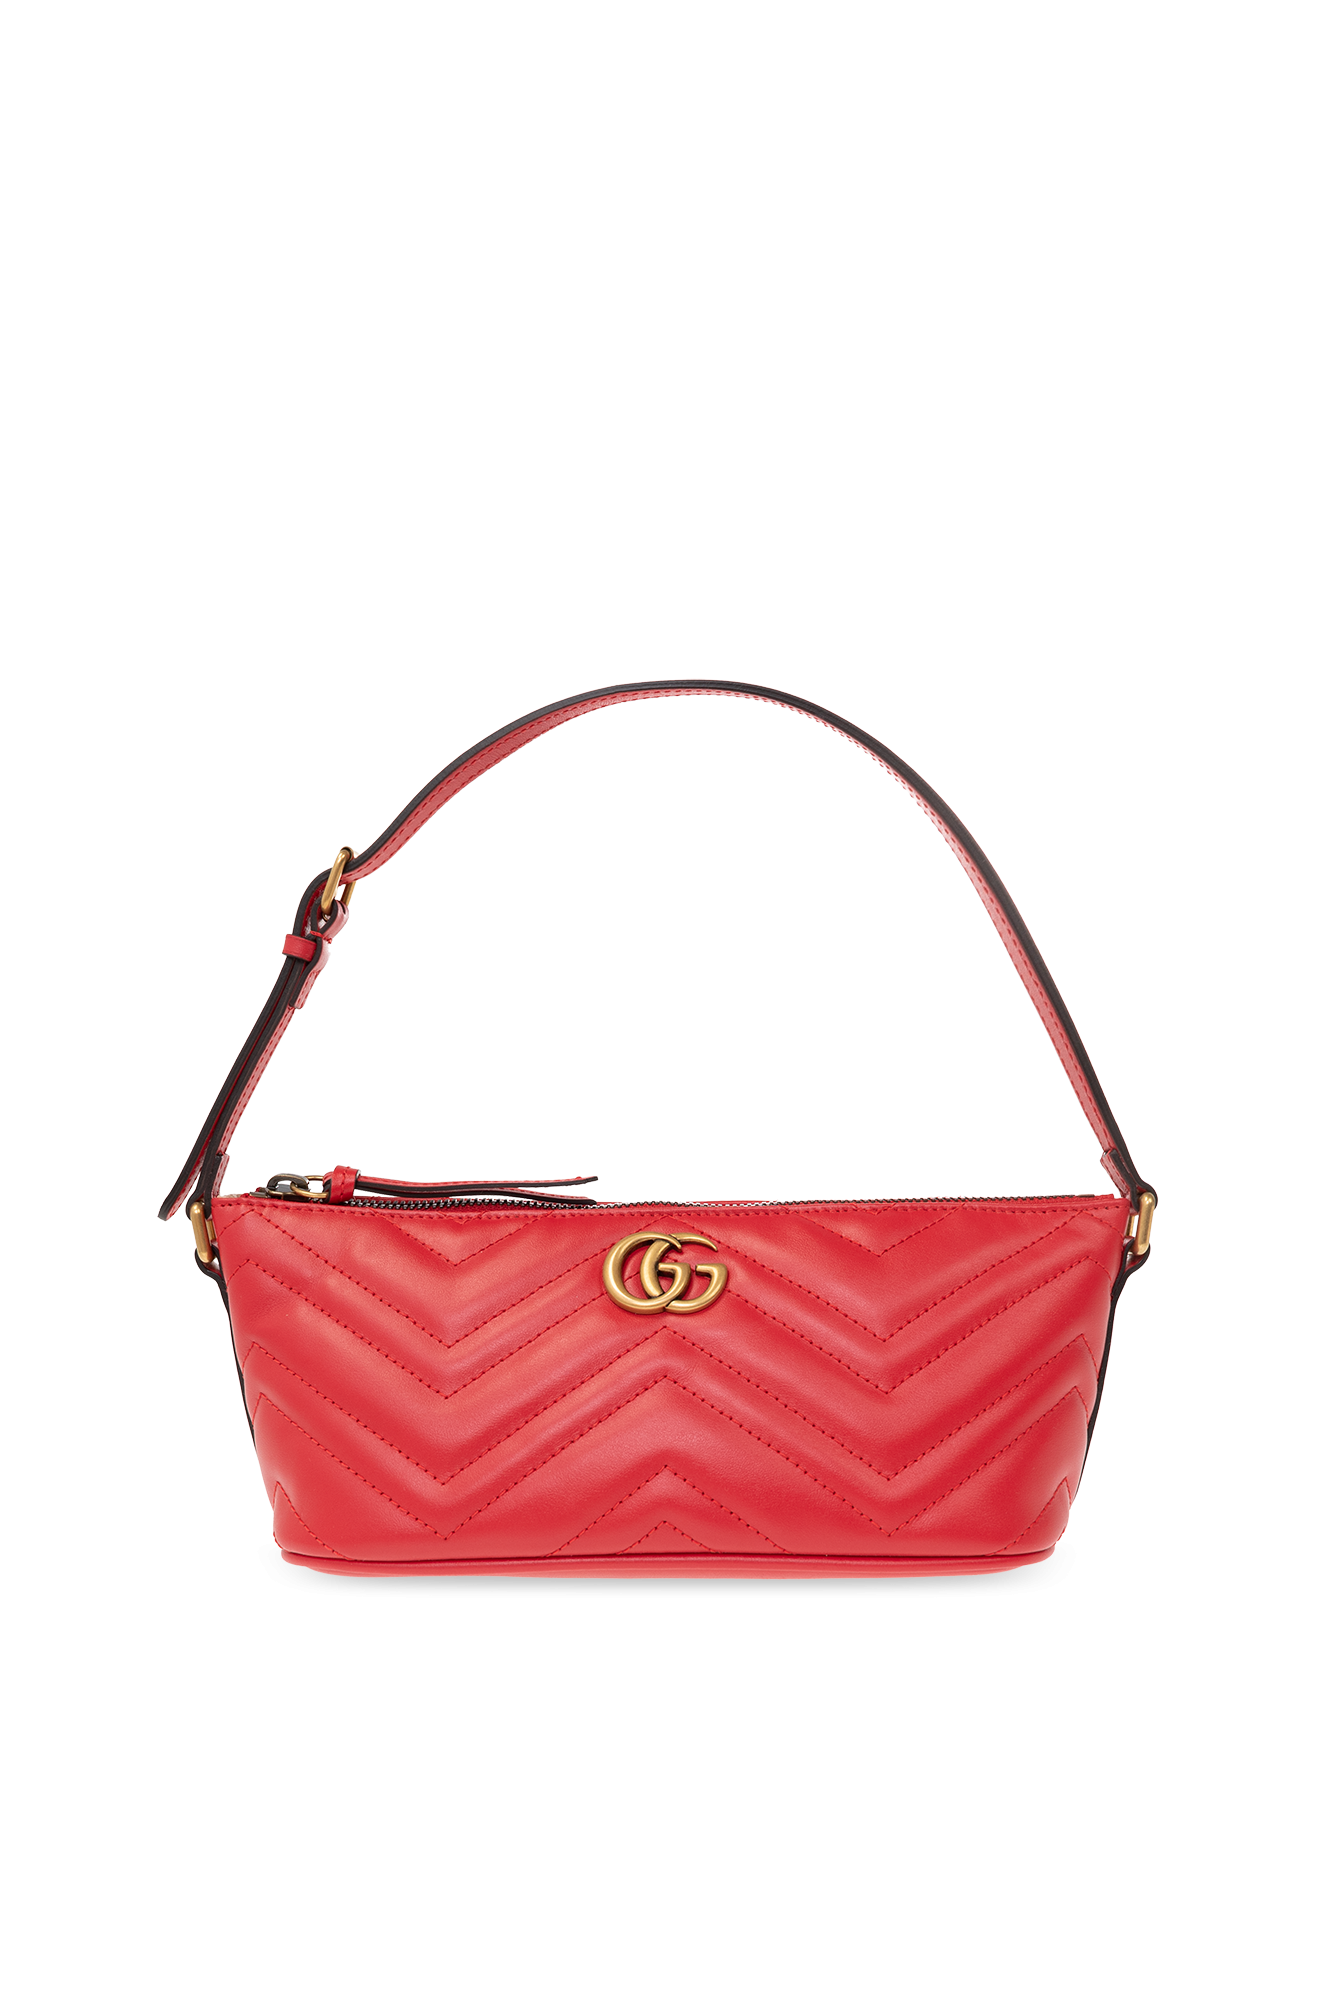 GUCCI With gucci X UNIVERSAL STUDIOS - SchaferandweinerShops GB - Red 'GG  Marmont Small' shoulder bag With gucci